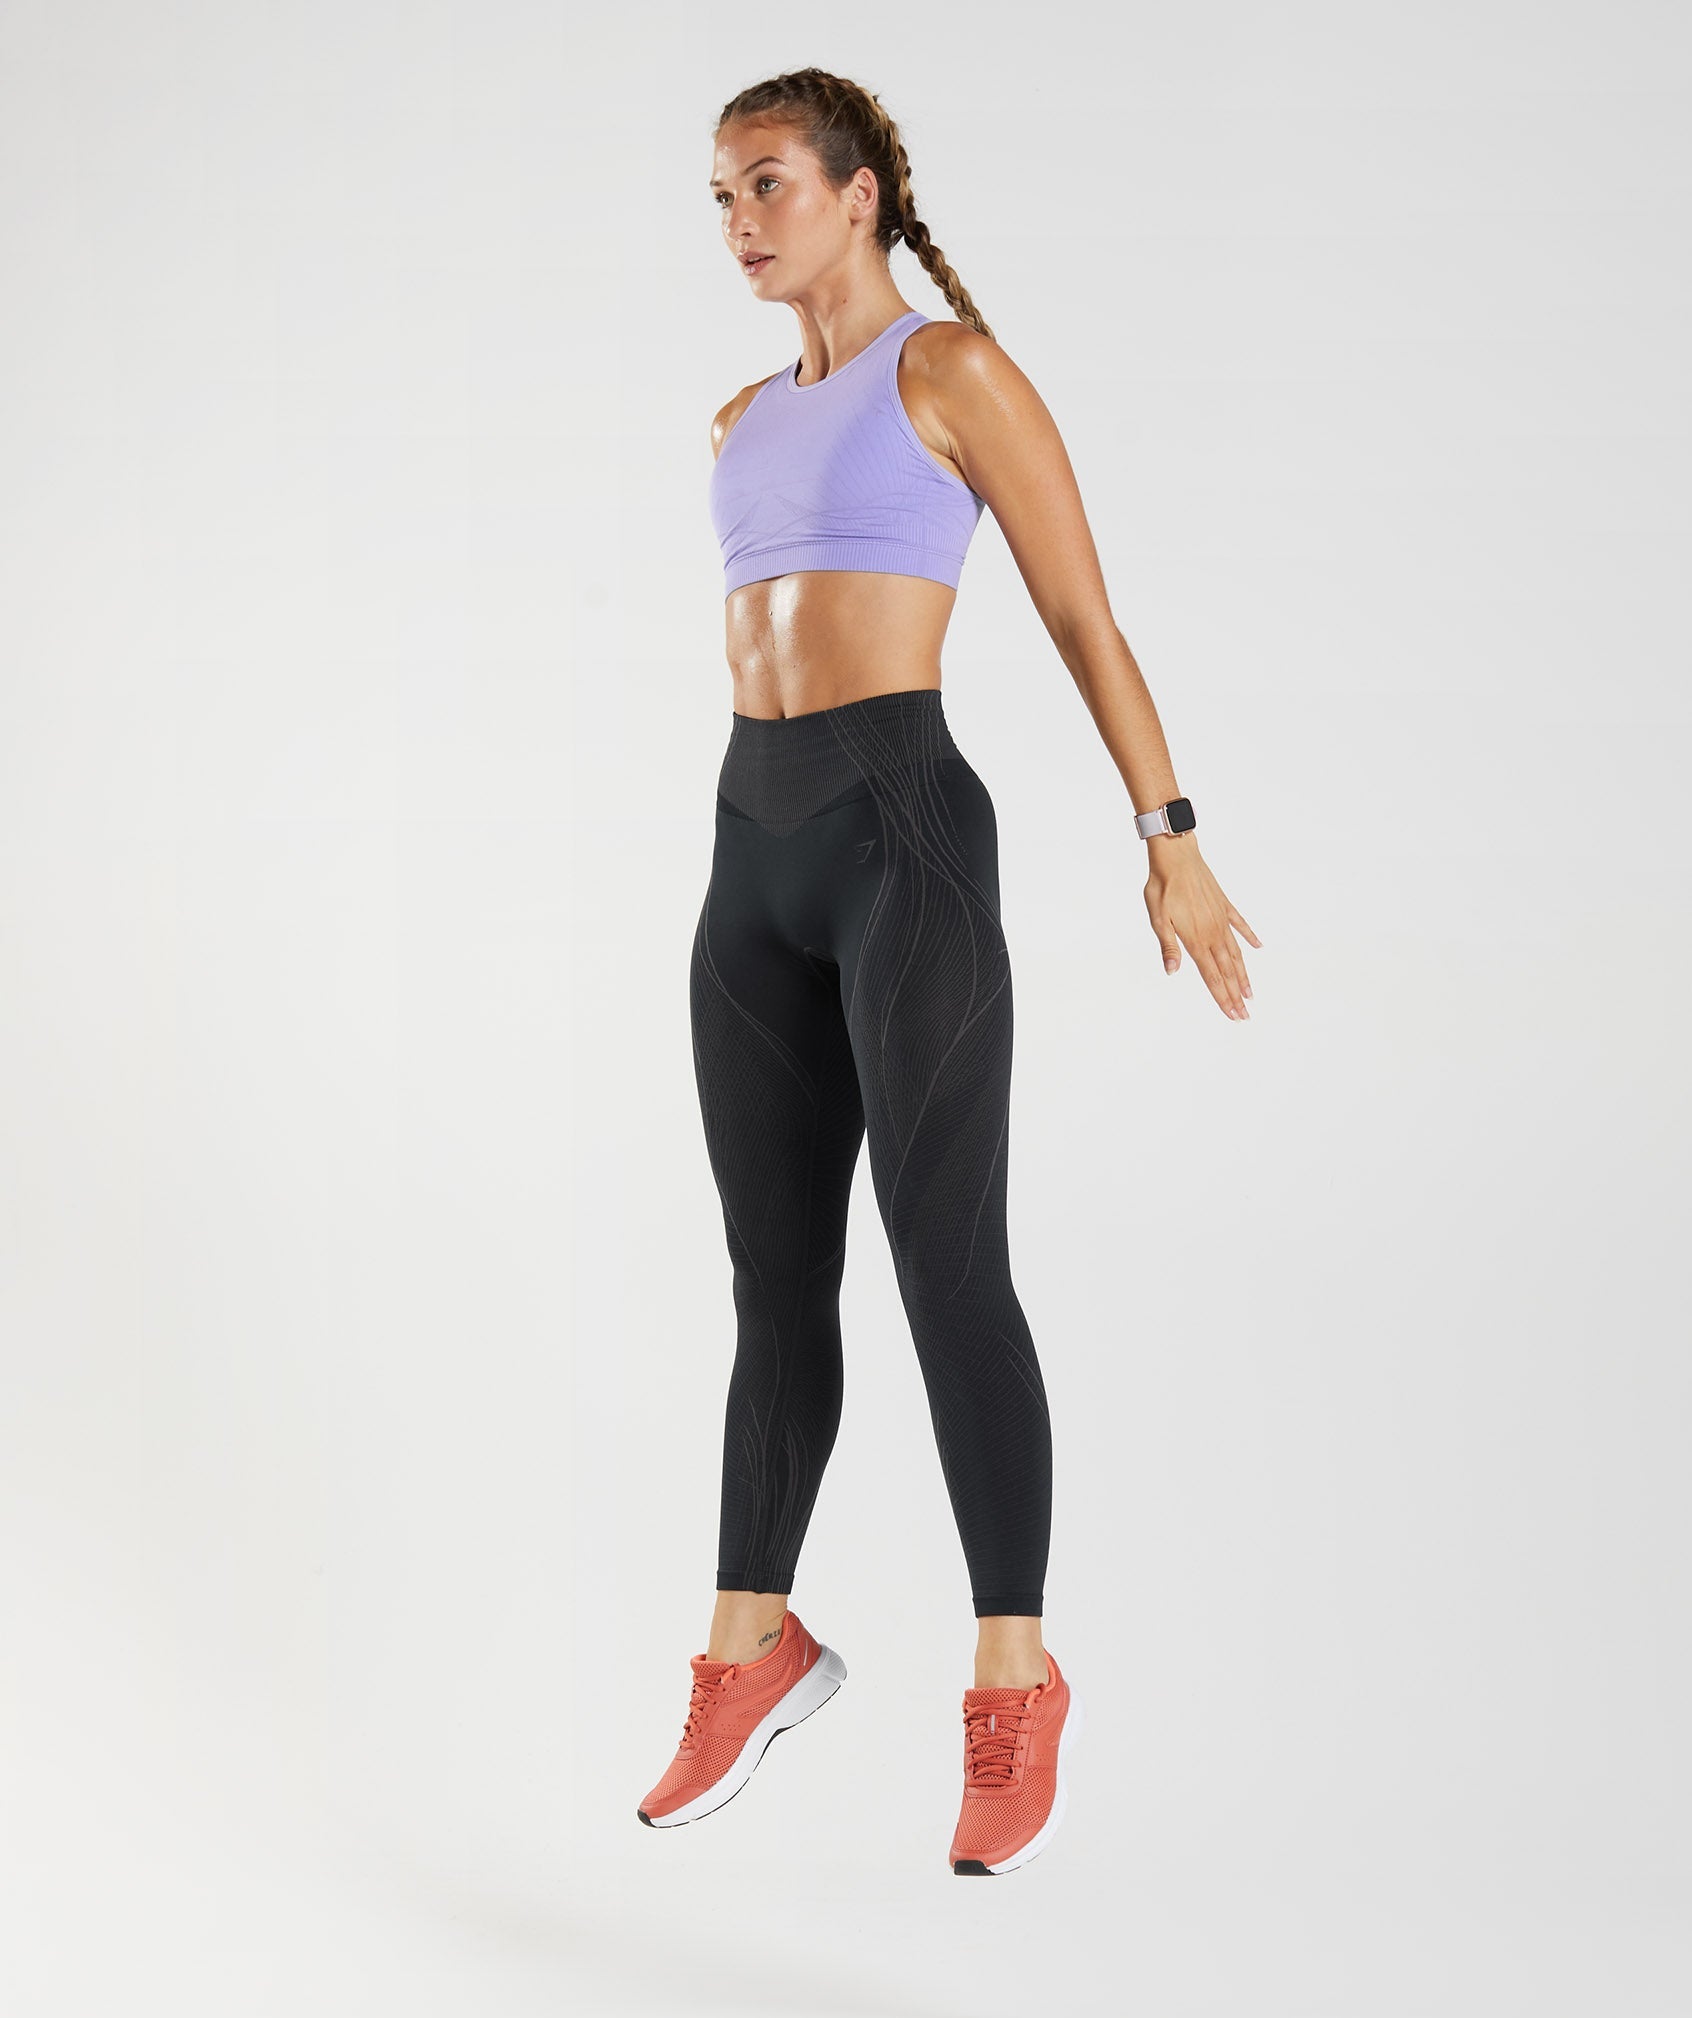 New In: Gymshark Apex. The Latest Women's Functional Training